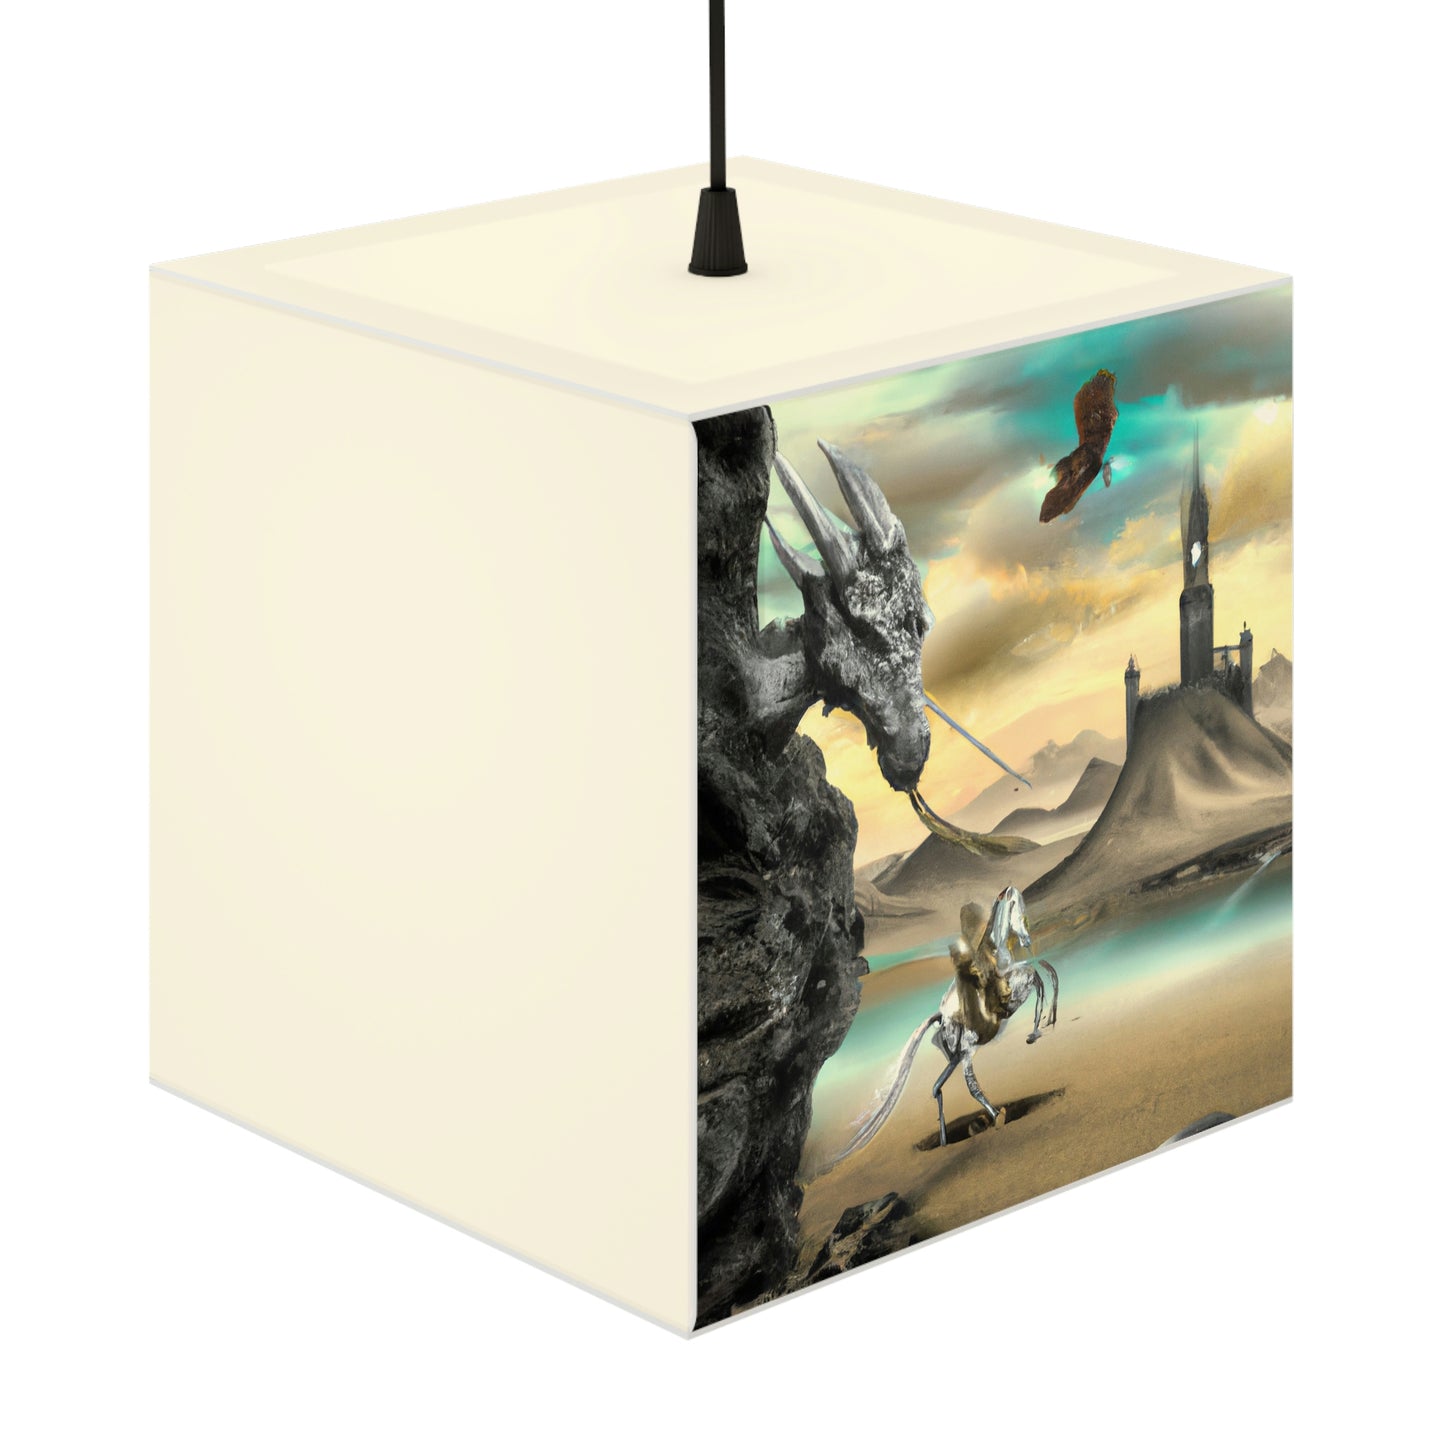 The Knight and the Dragon's Throne - The Alien Light Cube Lamp